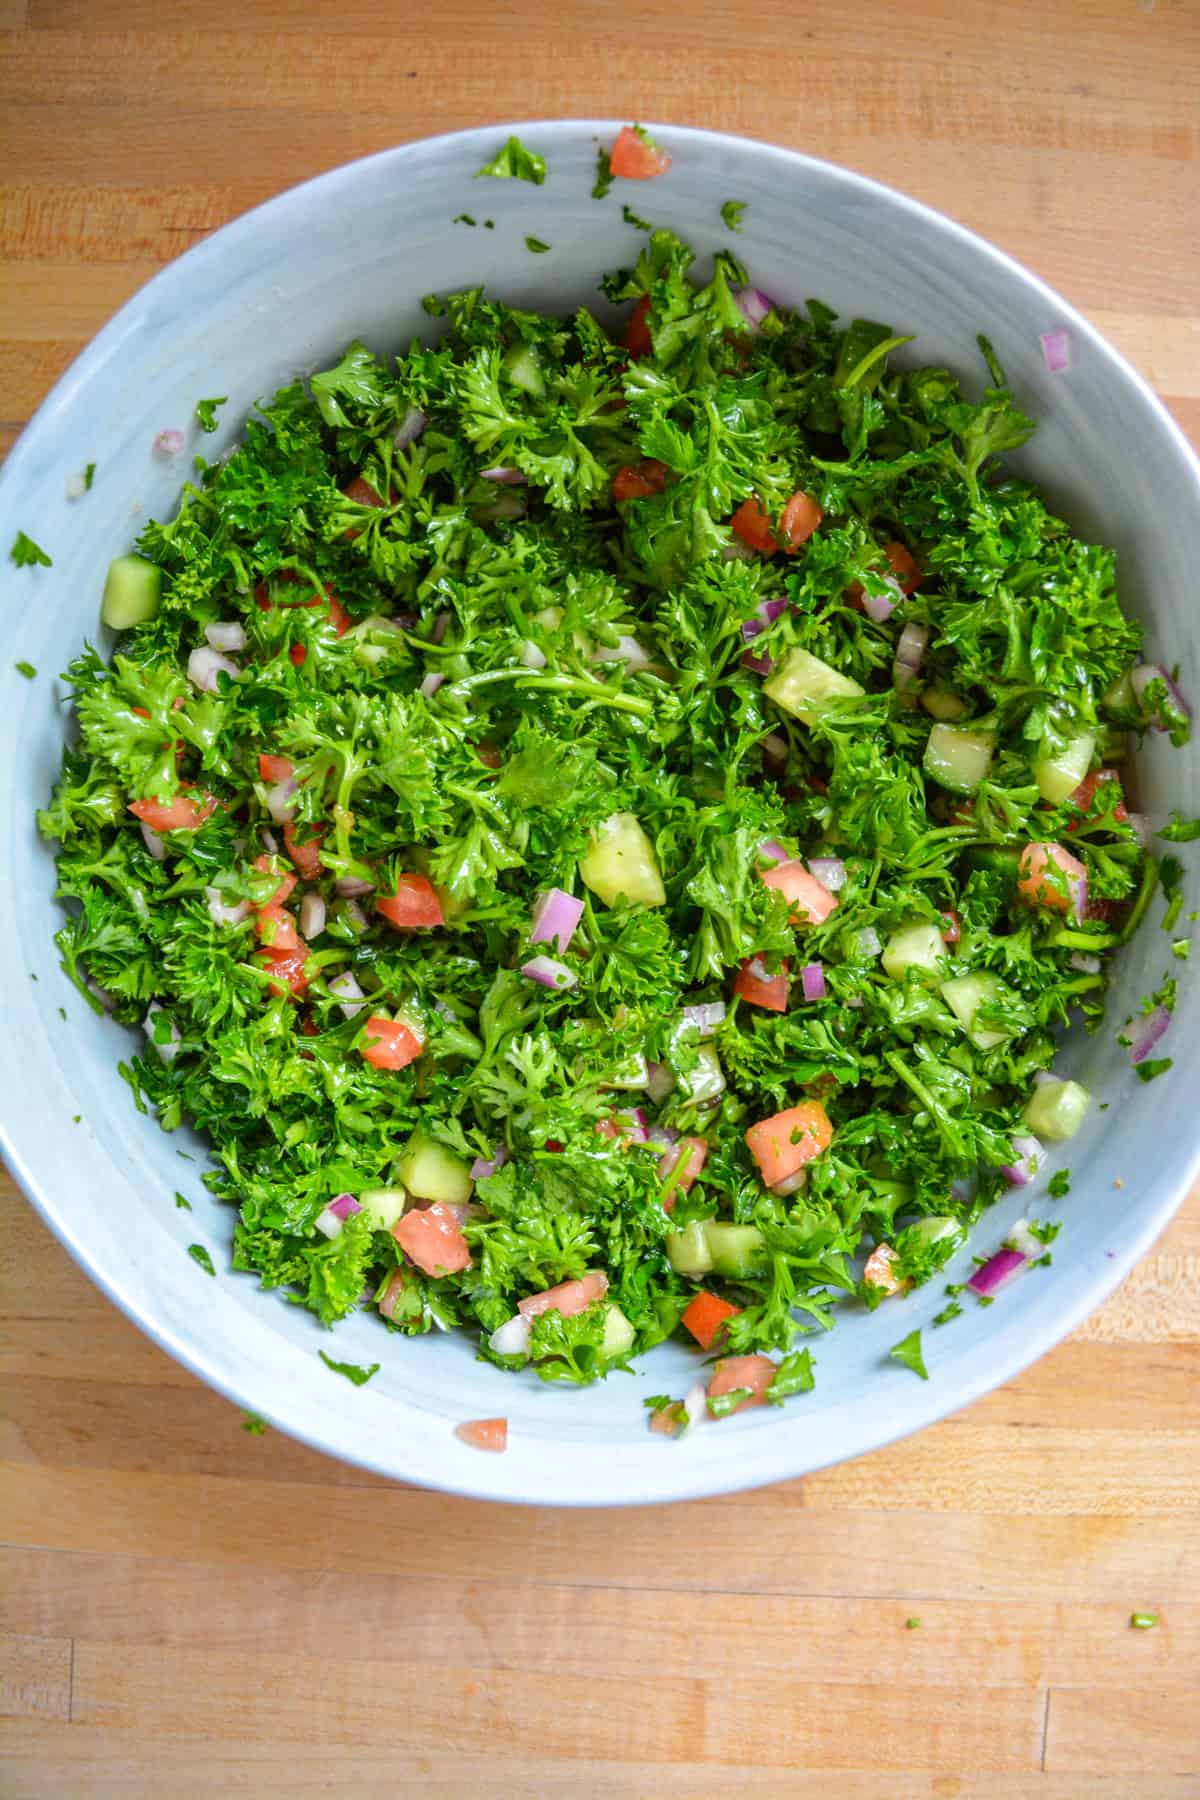 The tabouli salad recipe all tossed together in a mixing bowl.